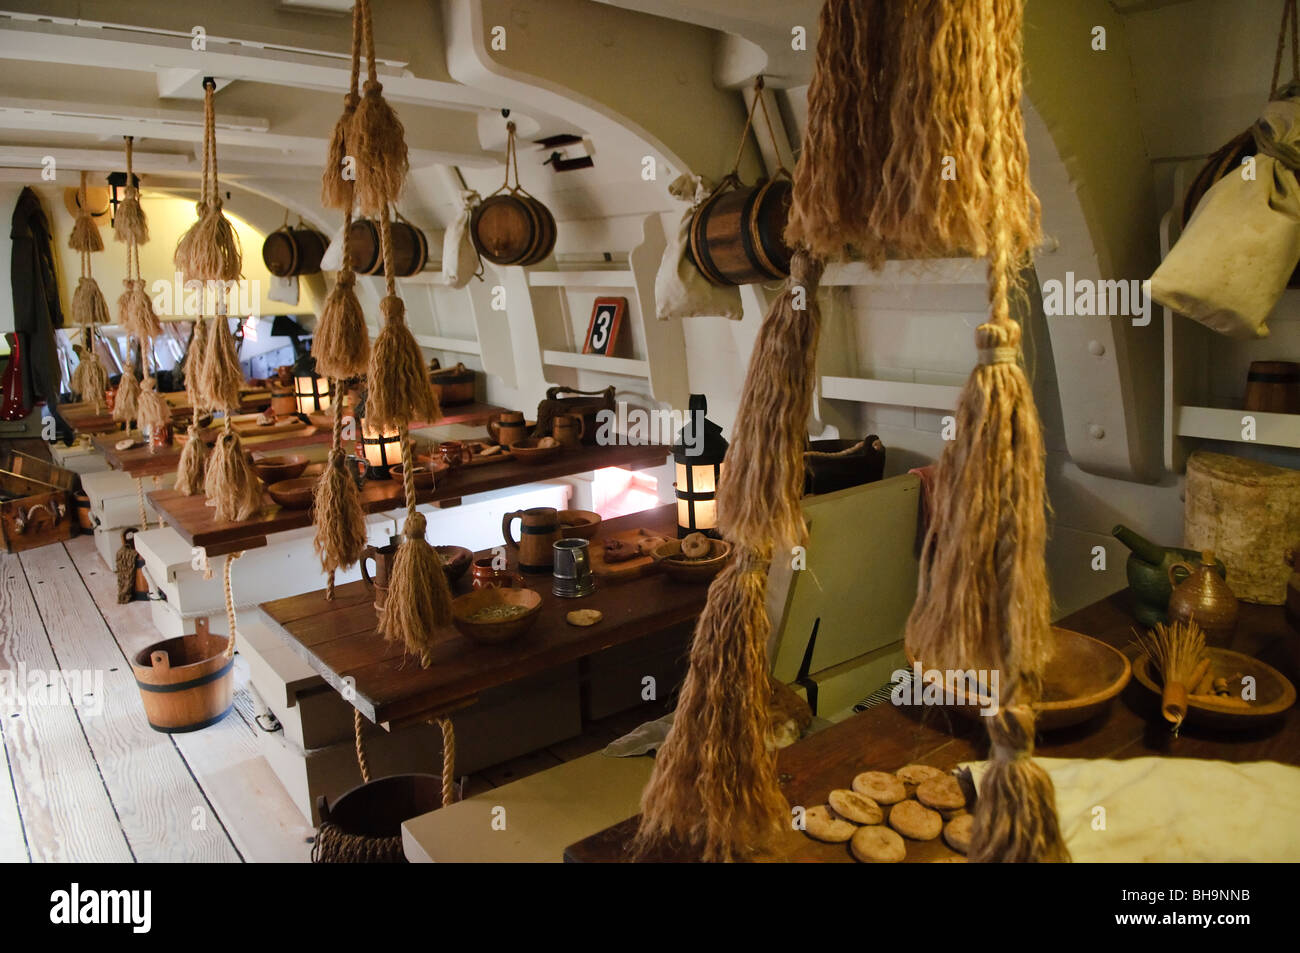 SYDNEY, Australia - SYDNEY, Australia - Interior below-decks of a full-size replica of Captain James Cook's HMS Endeavour ship on display at the Australian National Maritime Museum at Darling Harbour in Sydney Stock Photo